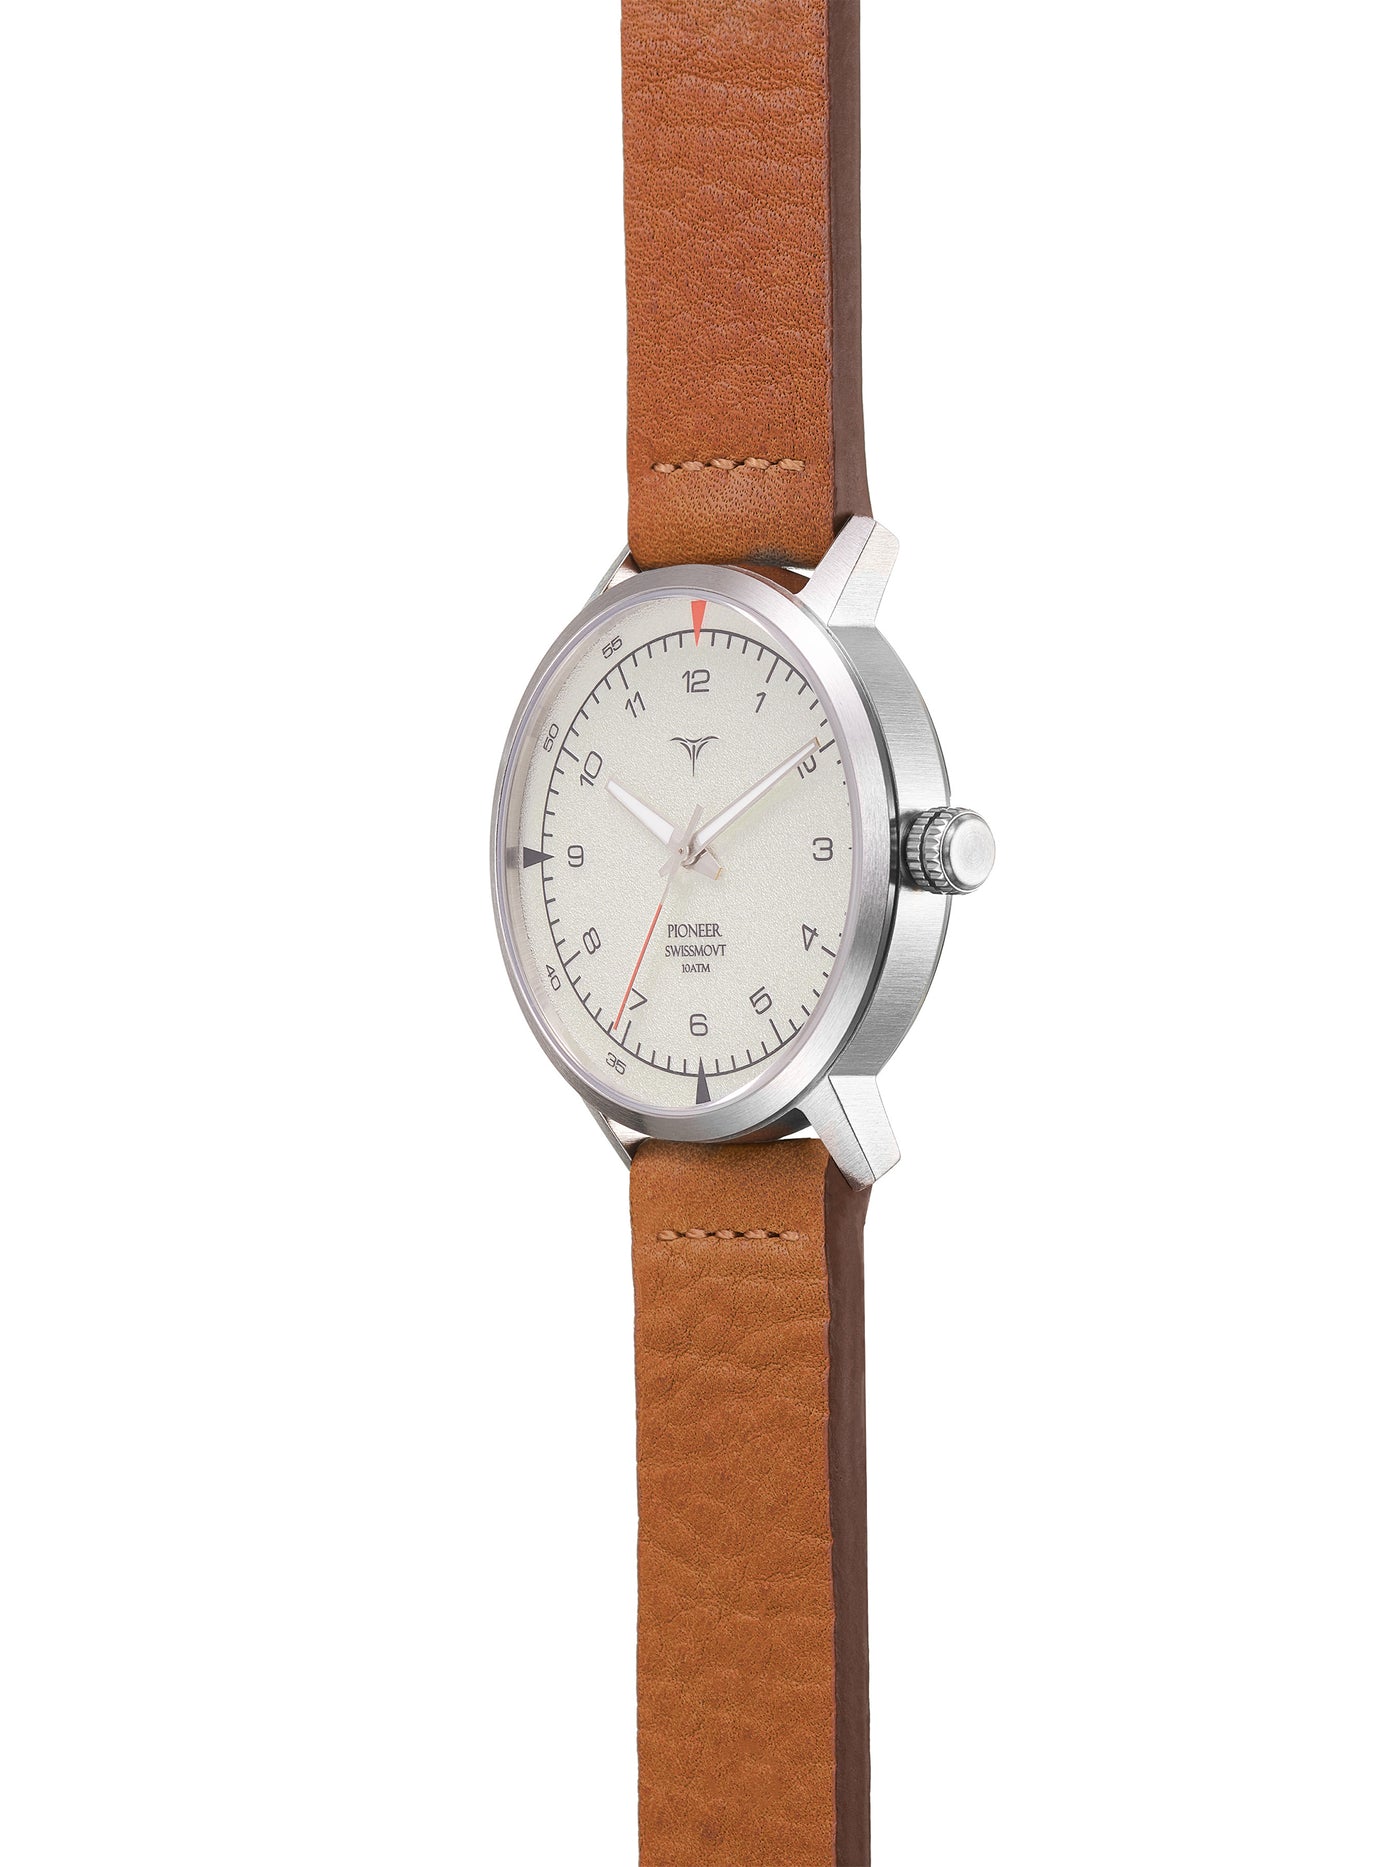 White dial Swiss Made quartz watches V-Pioneer with Brown Horween Leather Straps | Vstelle Watch